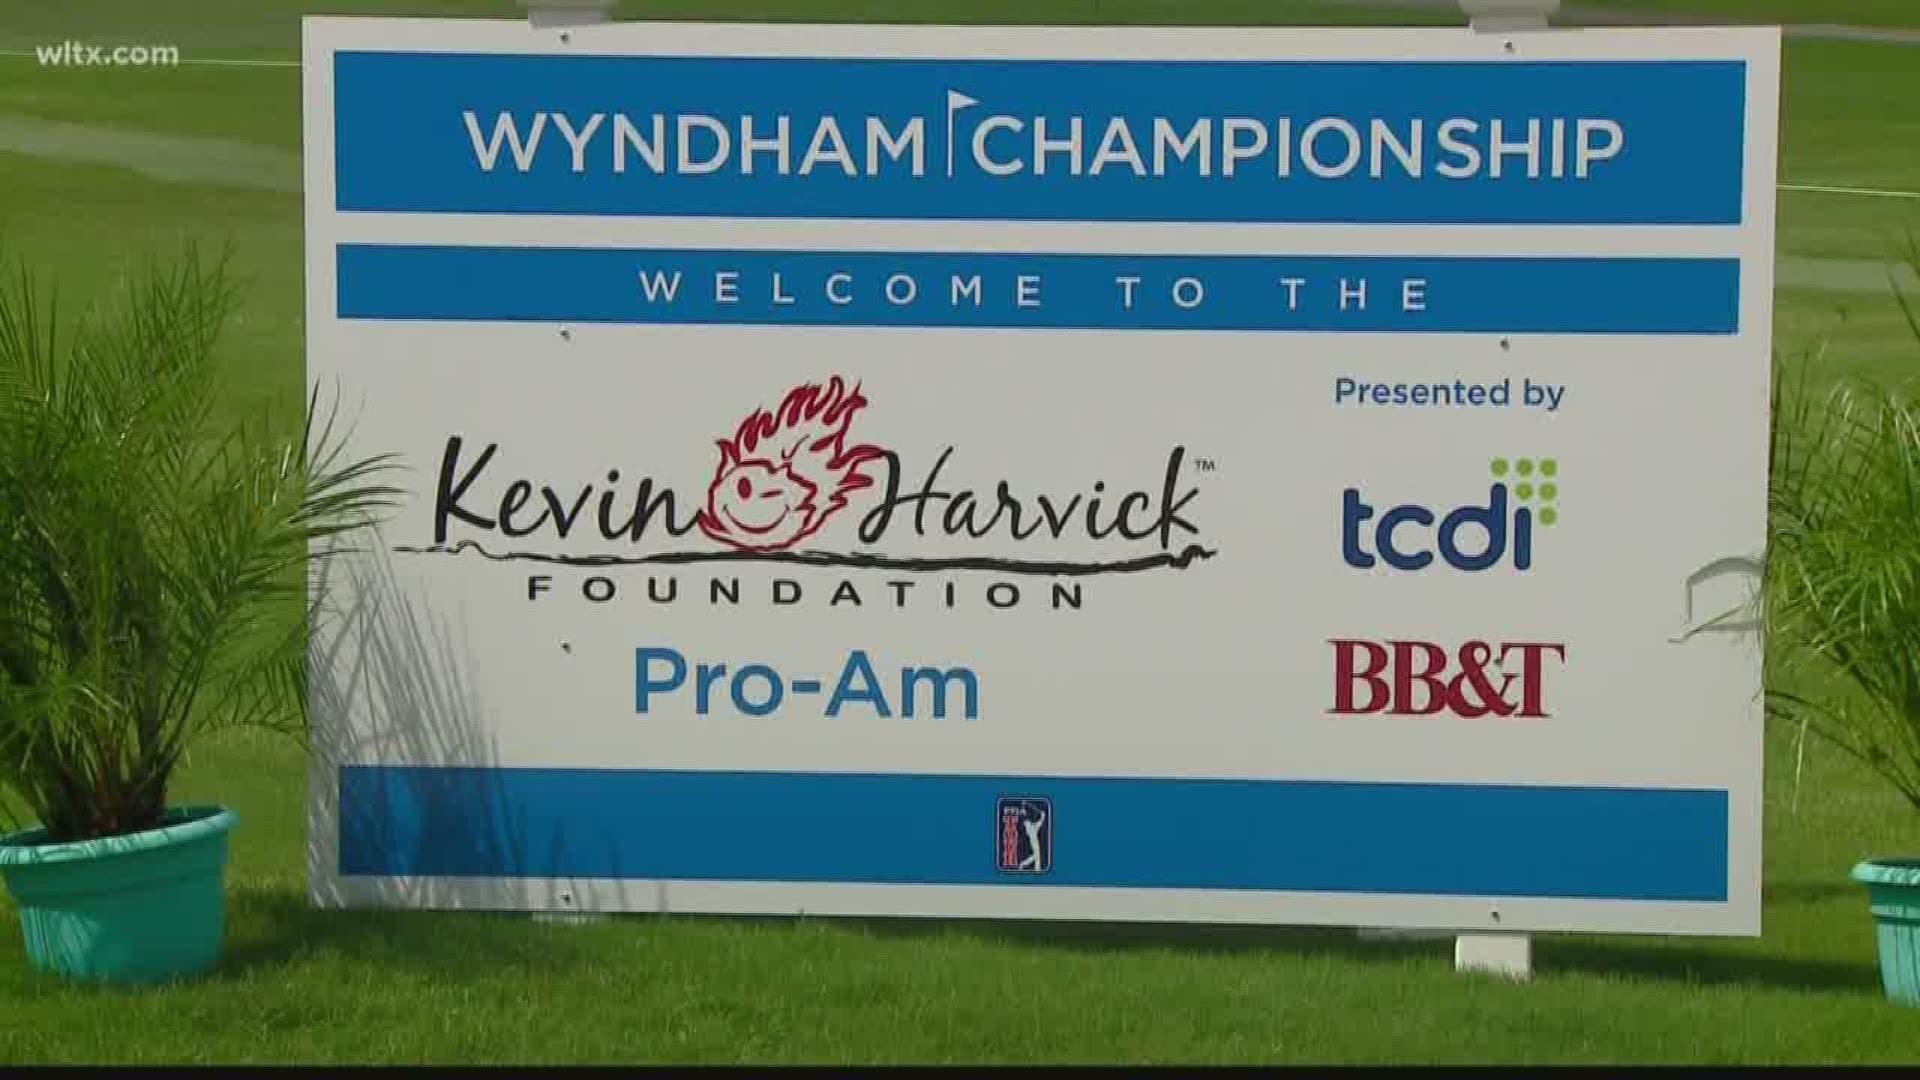 The annual Kevin Harvick Foundation Pro-Am was held at Greensboro's Sedgefield Country Club, the site for this week's Wyndham Championship.